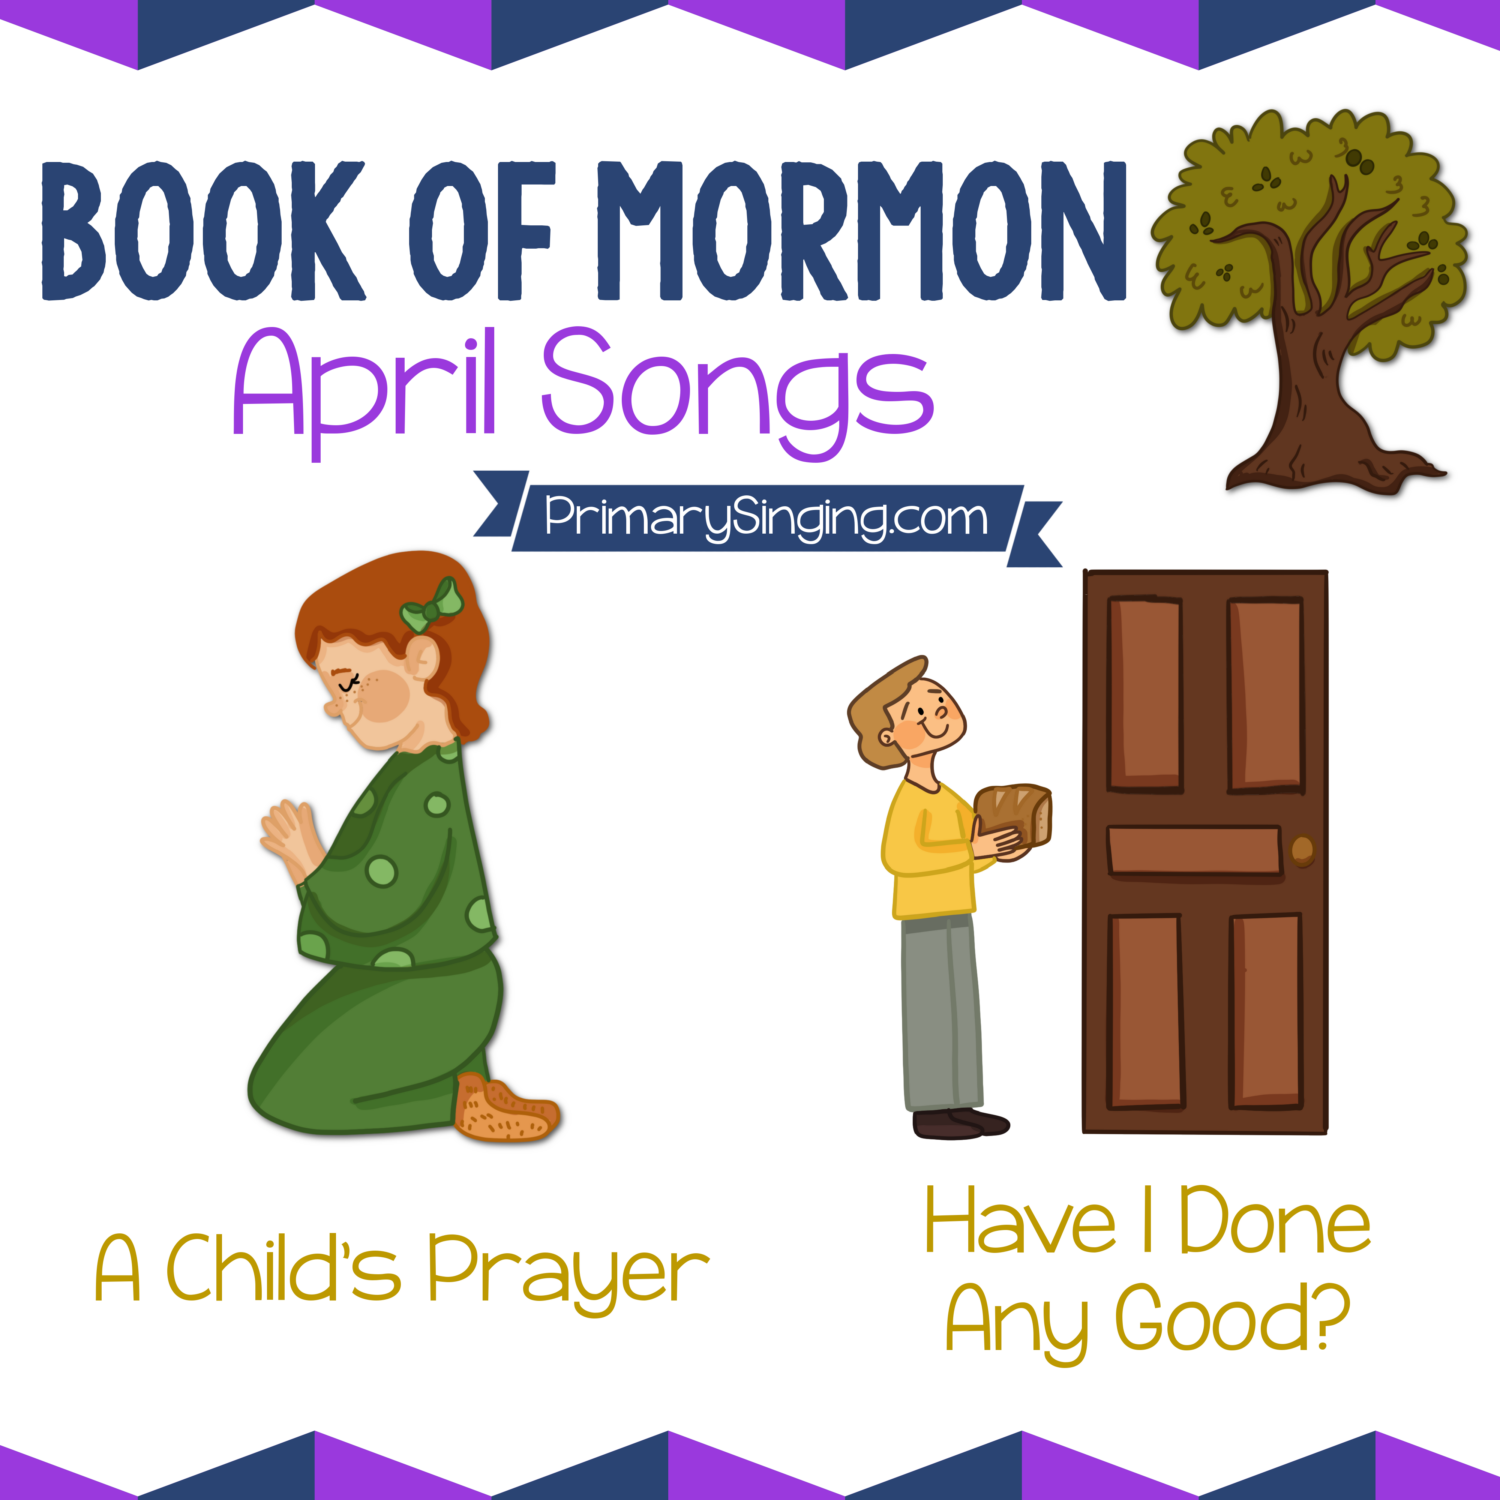 Book of Mormon April Song List - A Child's Prayer and Have I Done Any Good? Teach these 2 great Primary songs during Singing Time or home Come Follow Me lessons.